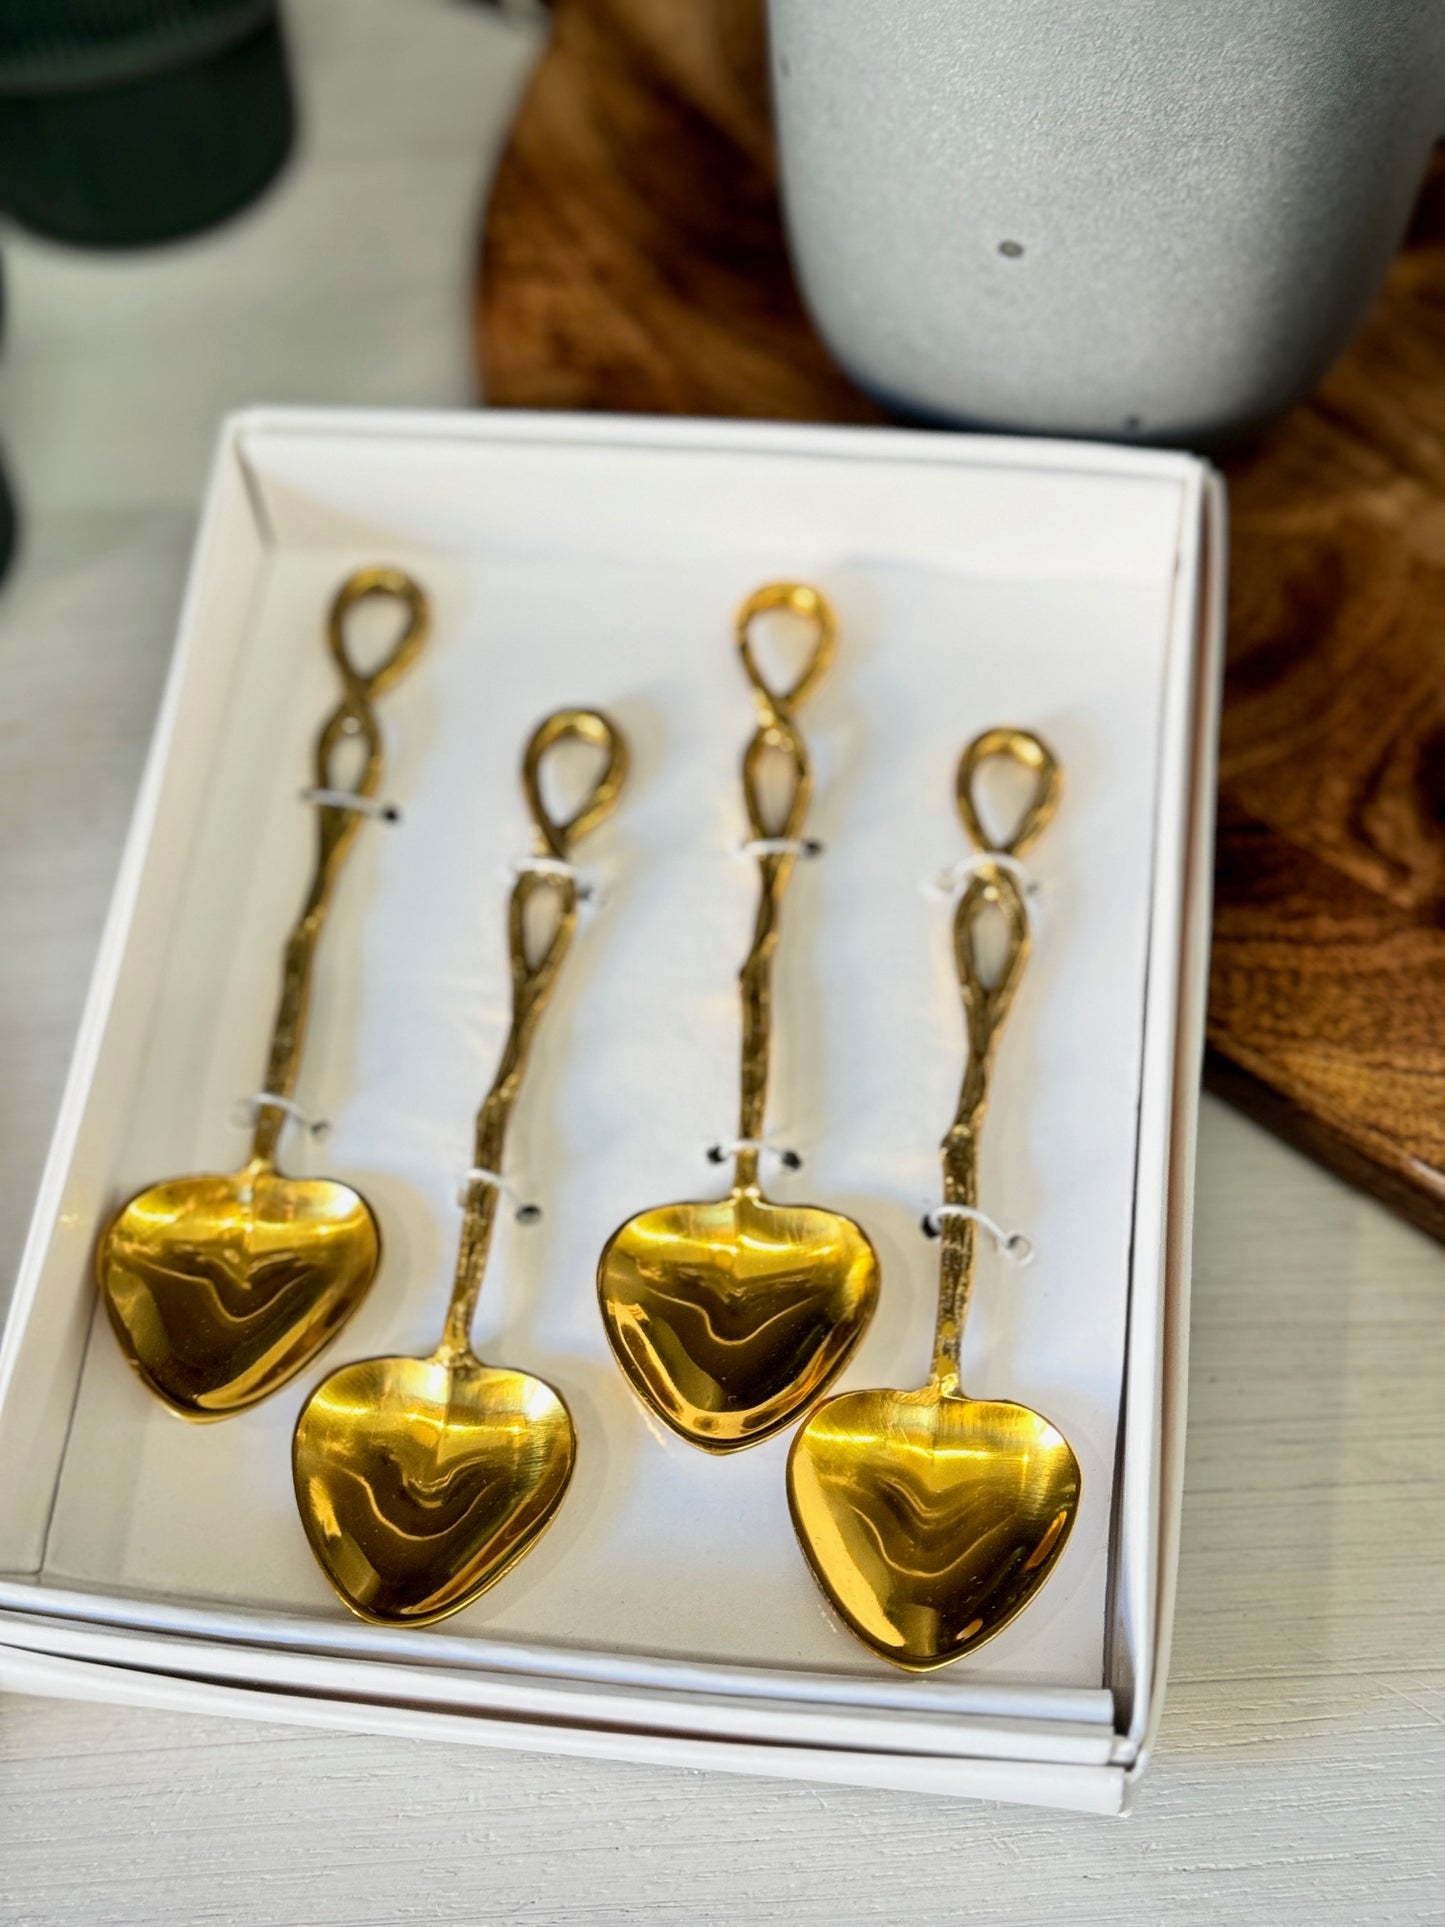 Boxed Gold Spoon set